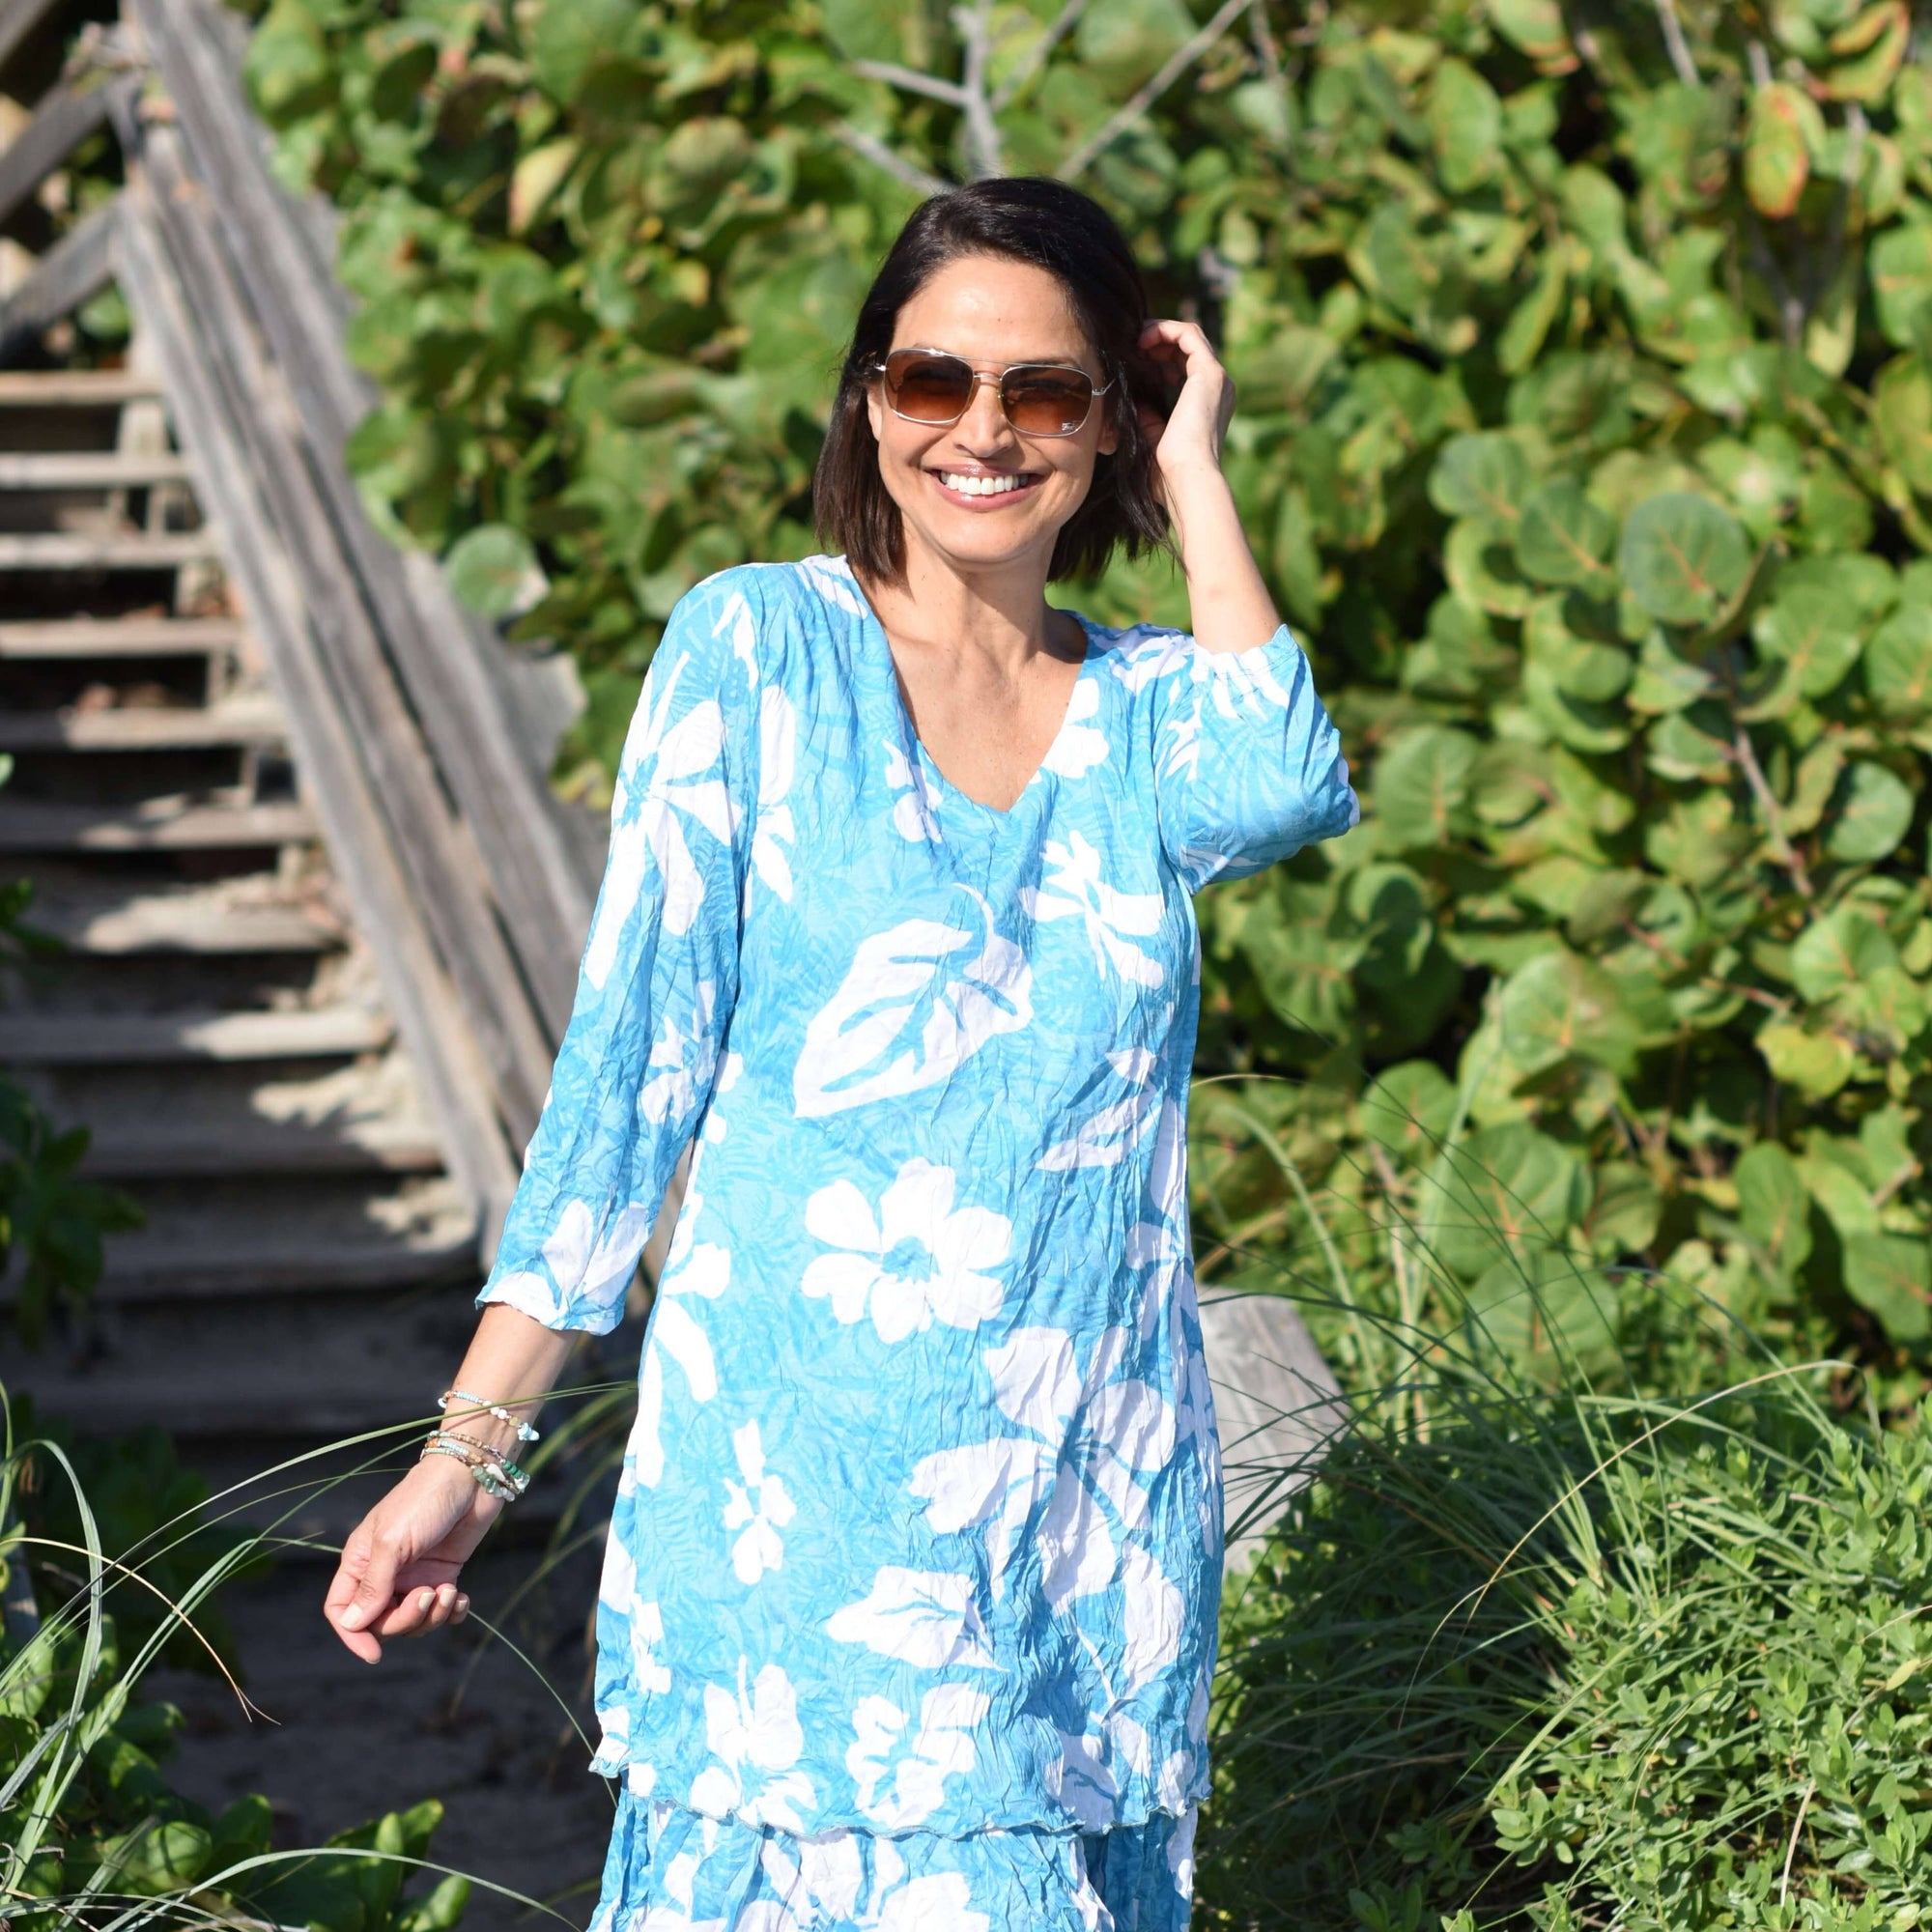 Happy Lady in Maxi Dress | Anthony's Blog